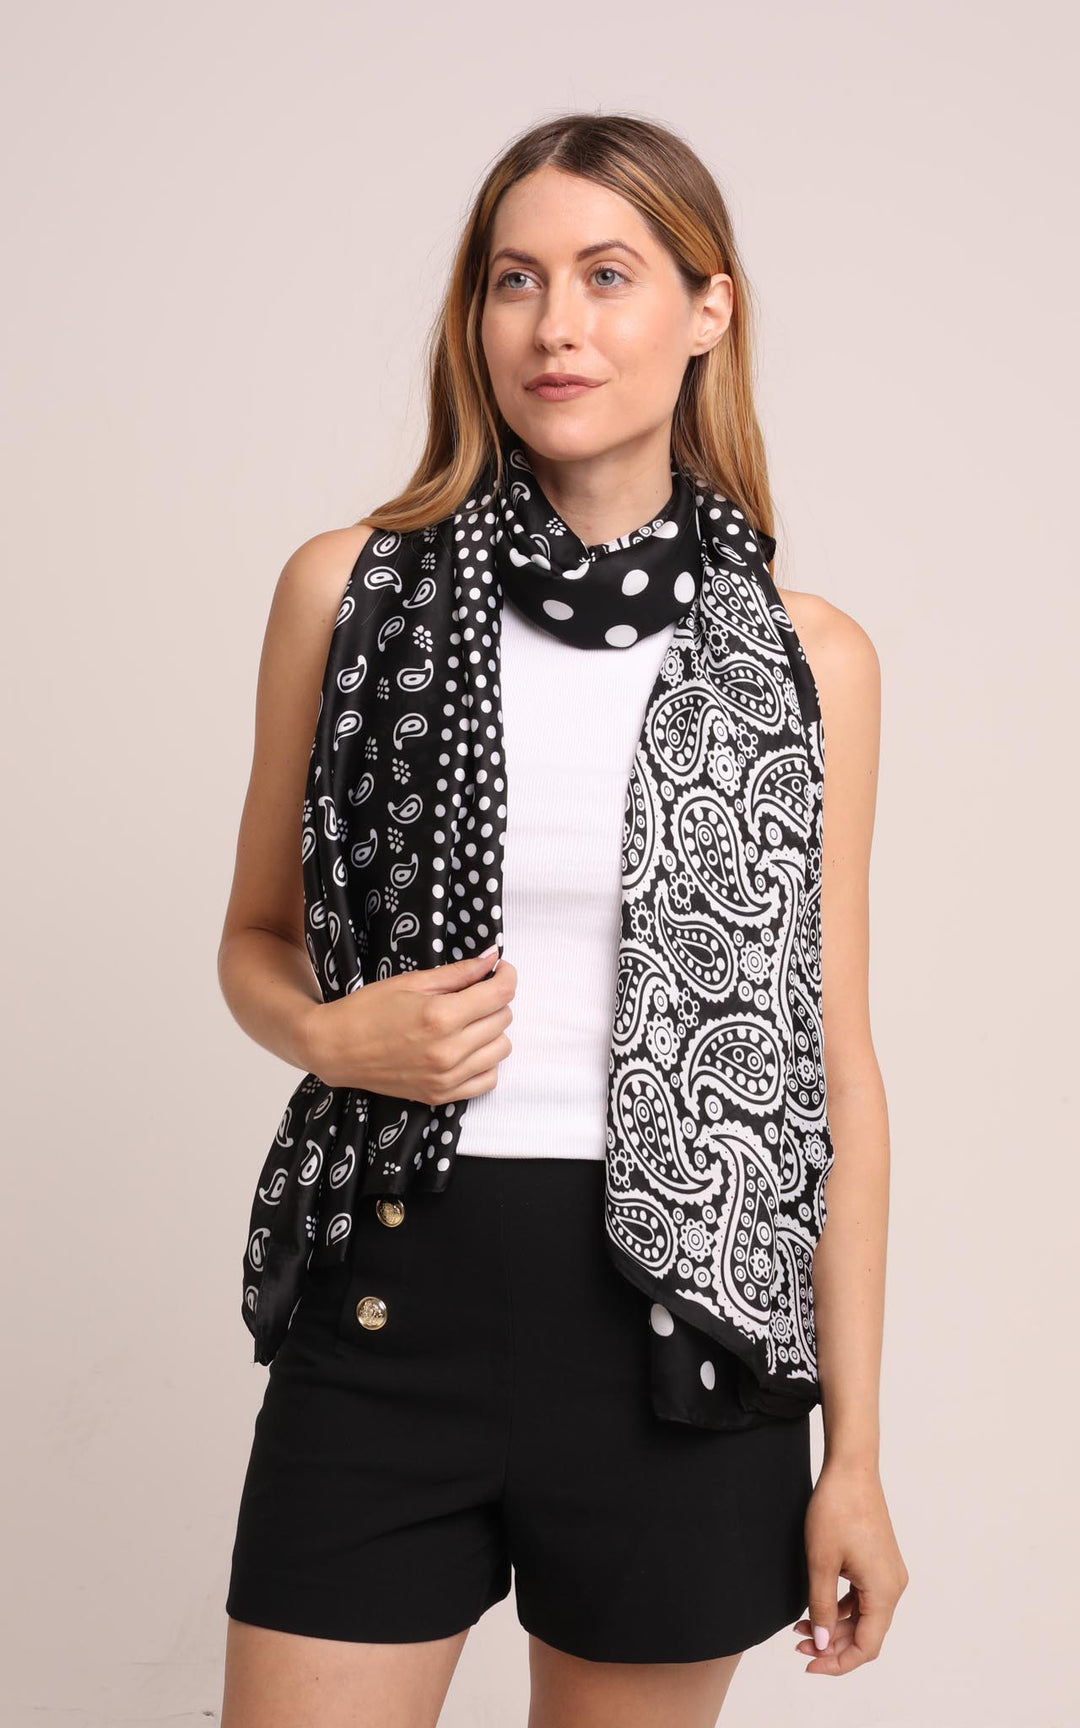 Silk Scarf in Black and White Paisley & Polka Dots